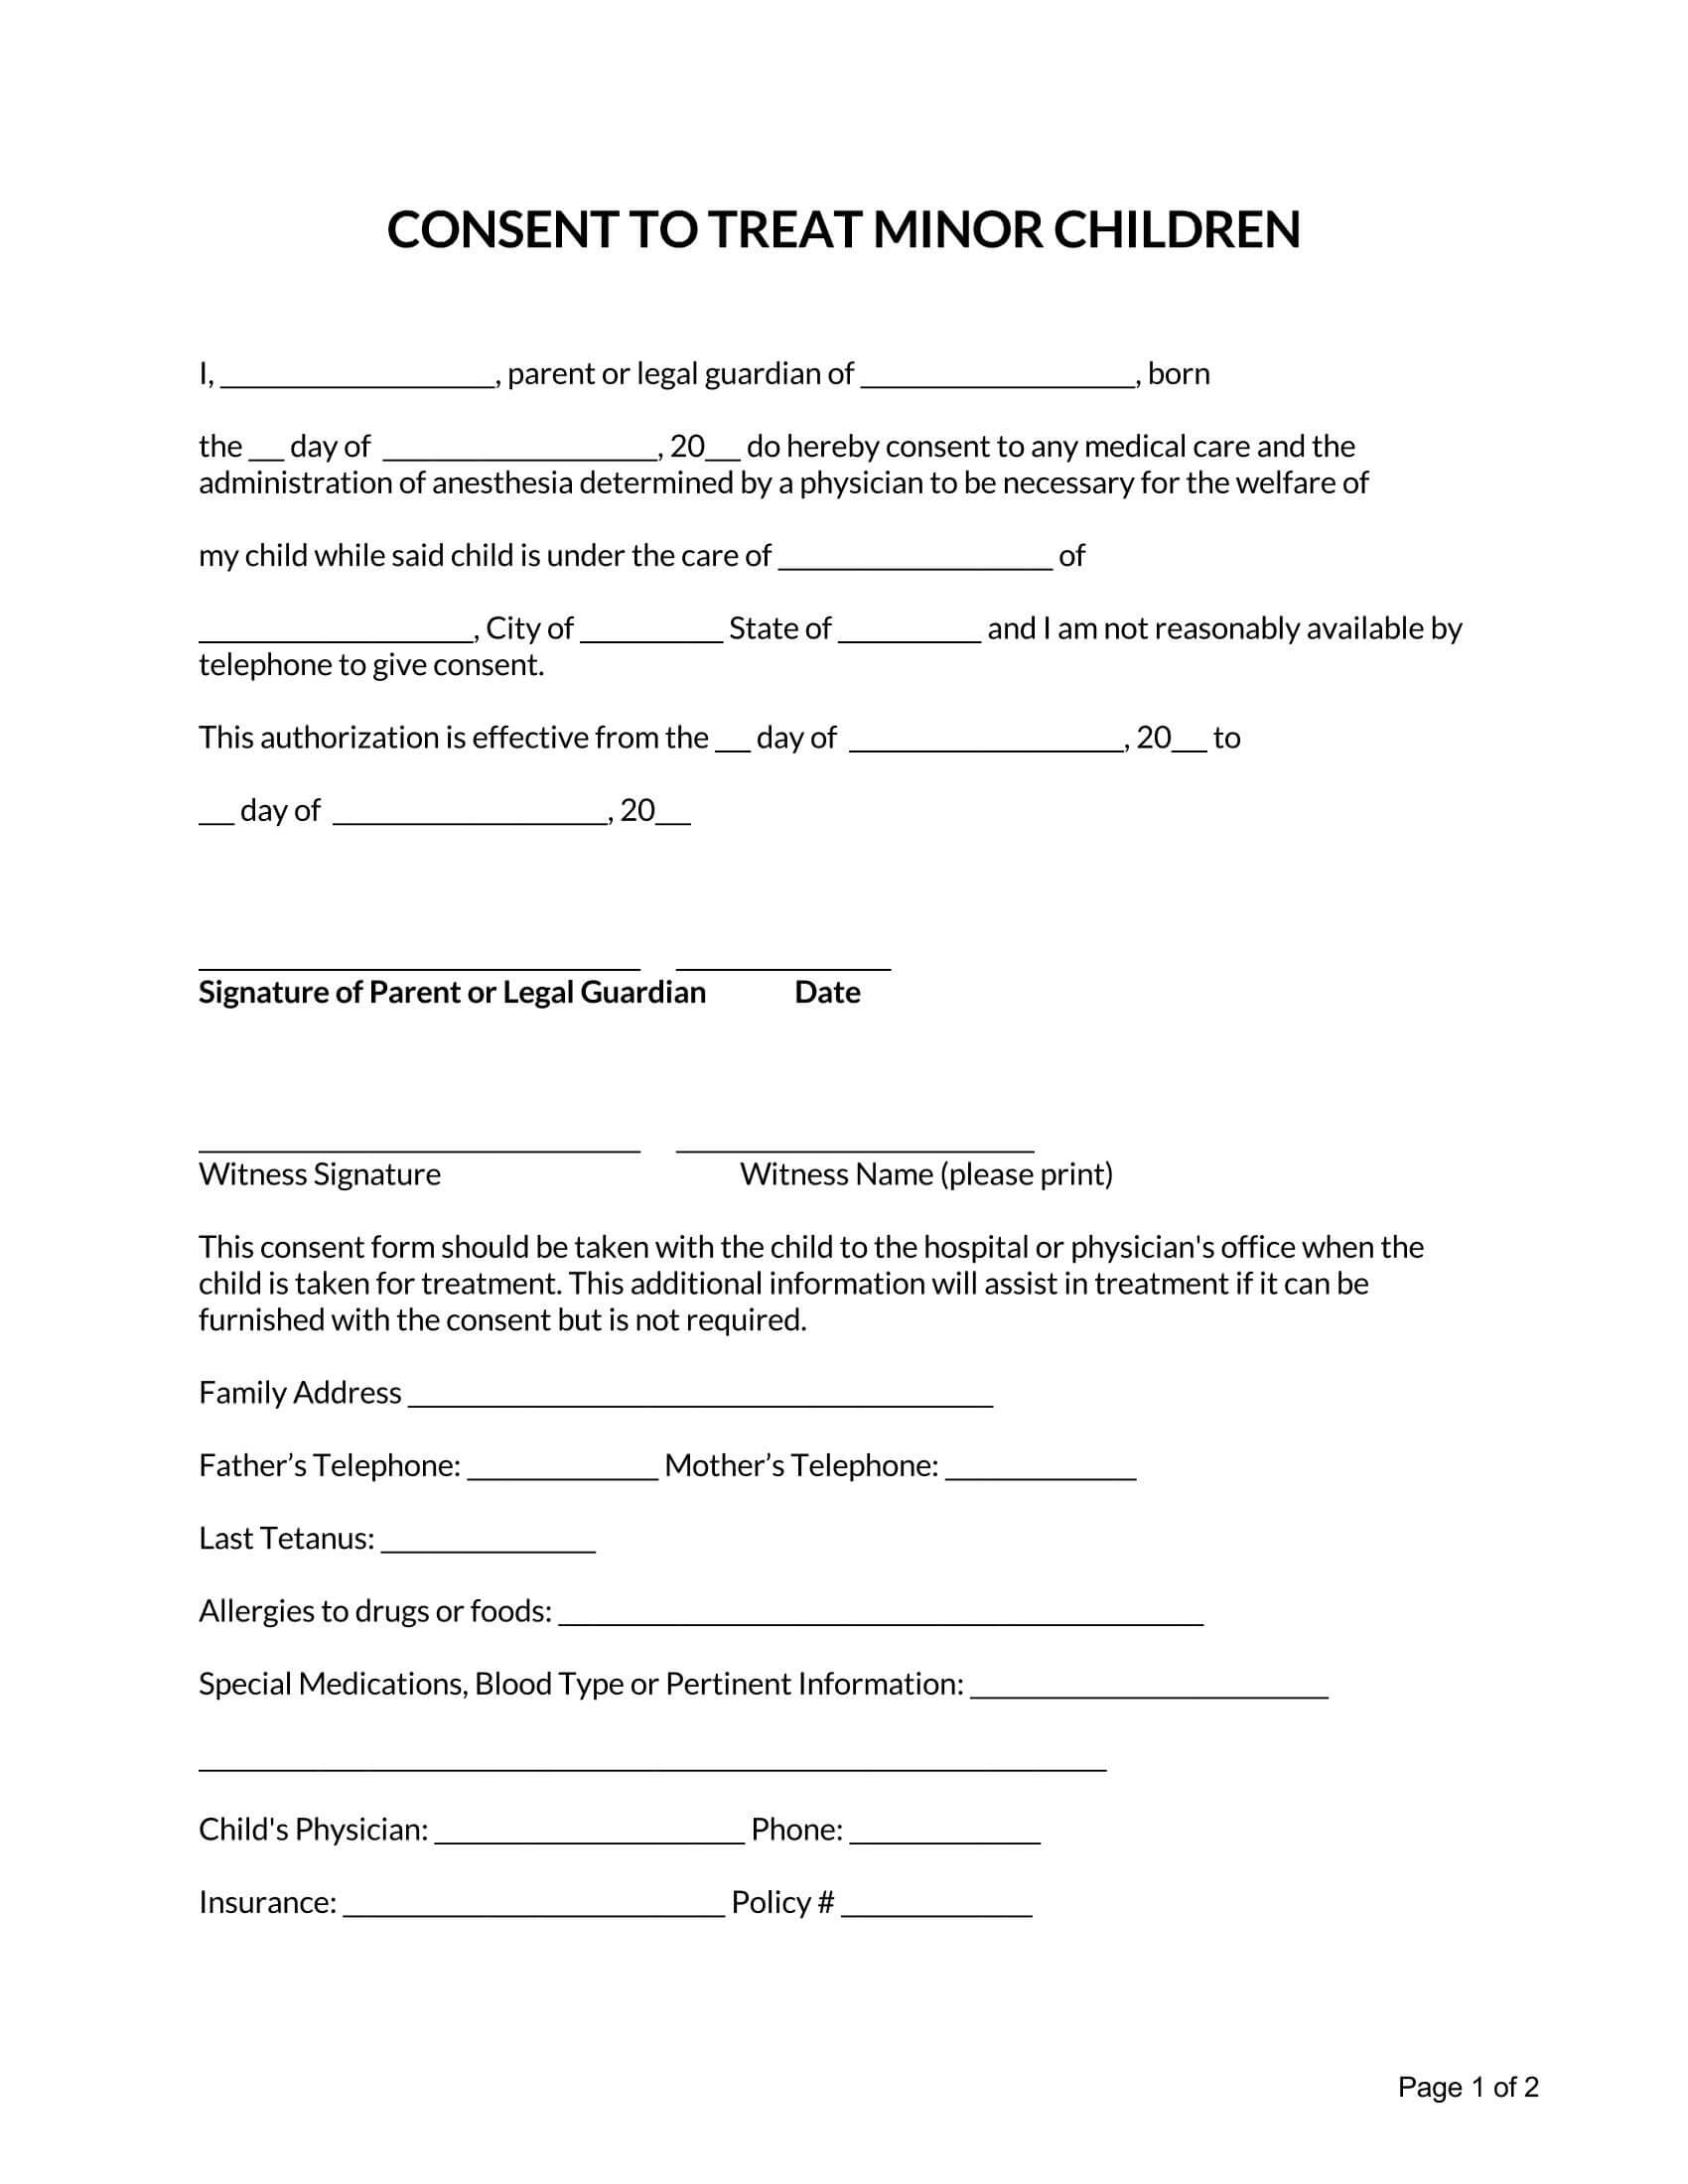 Minor Child Medical Consent Form_Page_1